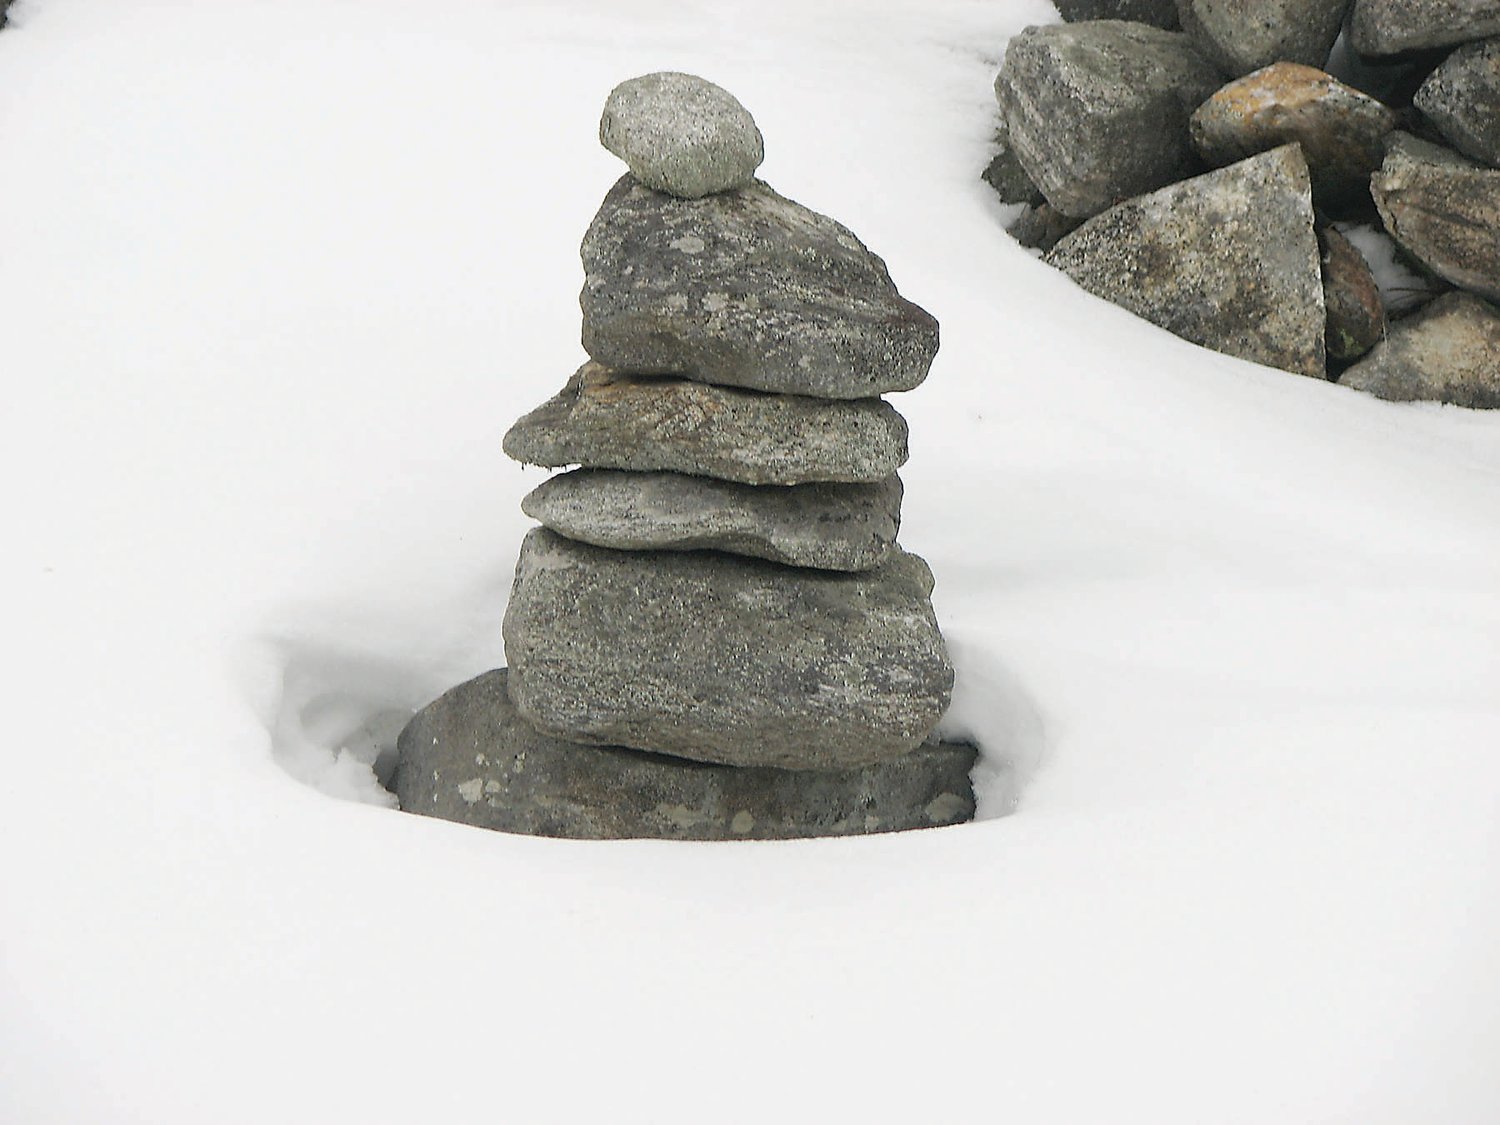 A cairn you can build this winter as suggested by the Compleat Gardener.